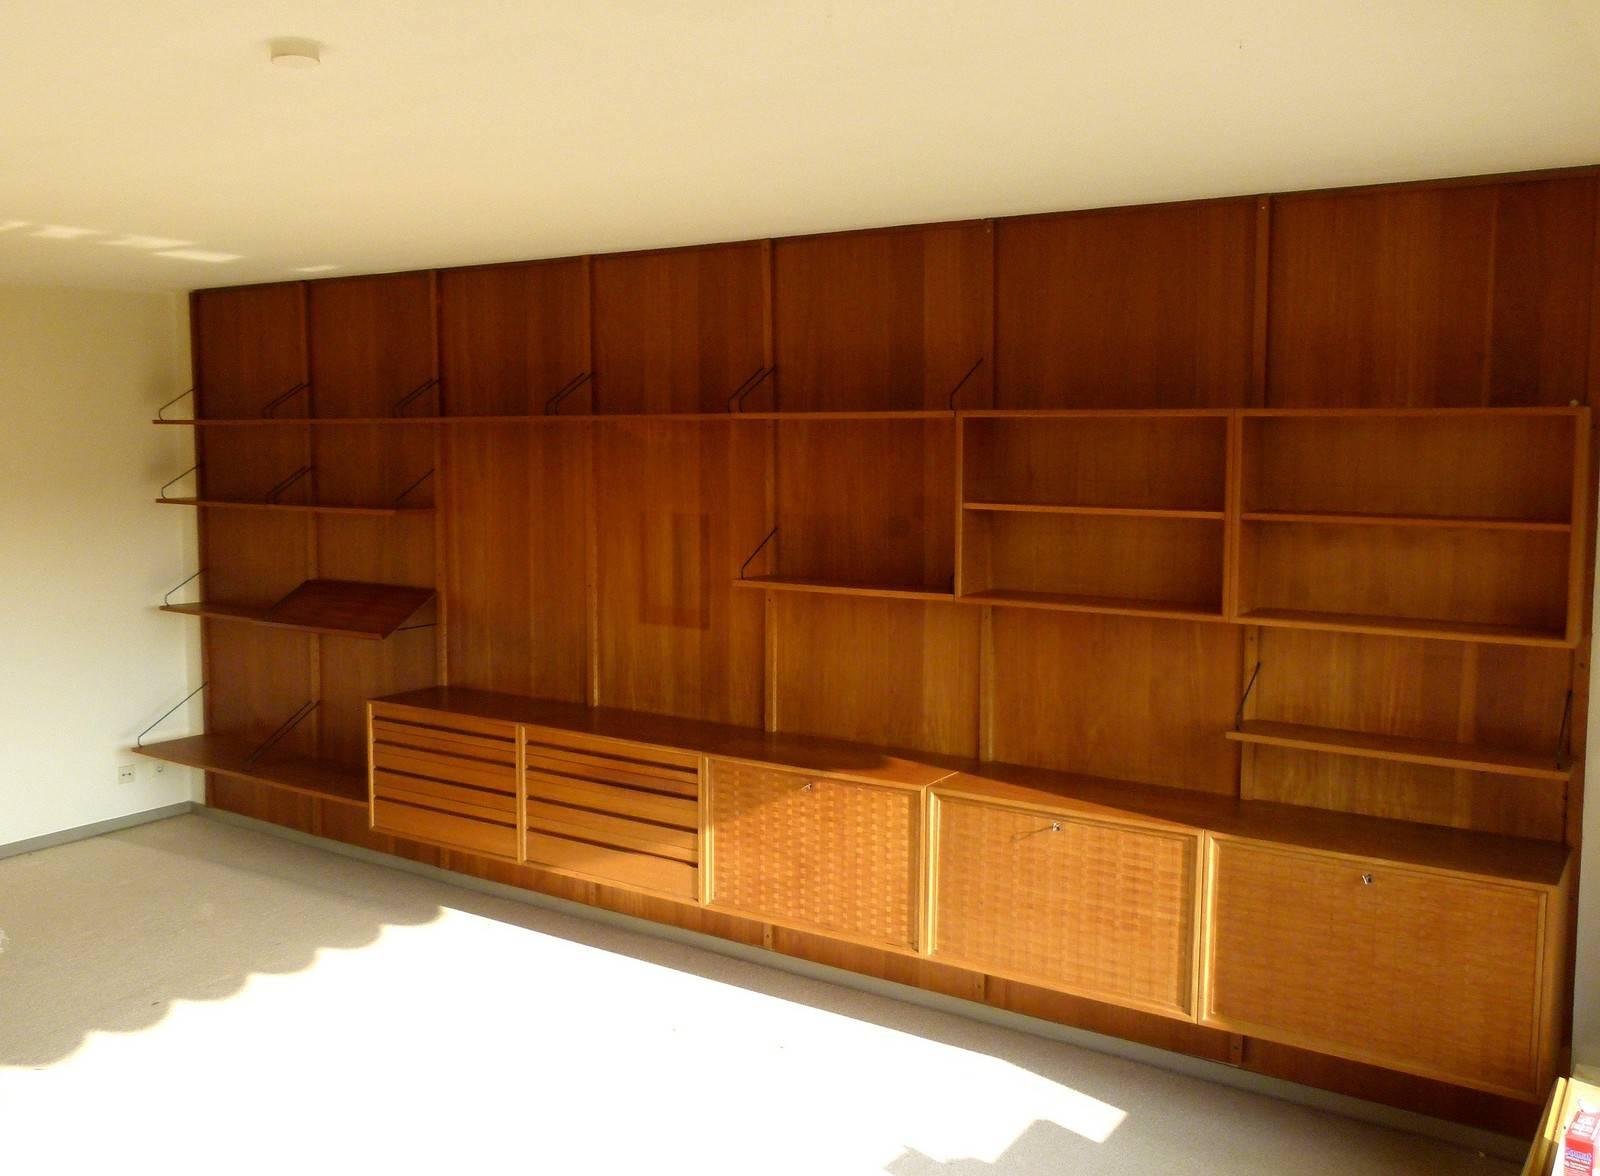 This large Royal System shelving unit was designed by Poul Cadovius for Cado in 1958 or 1959. It features surfaces in teak veneer and mounts of black coated metal. The back walls are coverings, which are fastened with the strips. Please note that